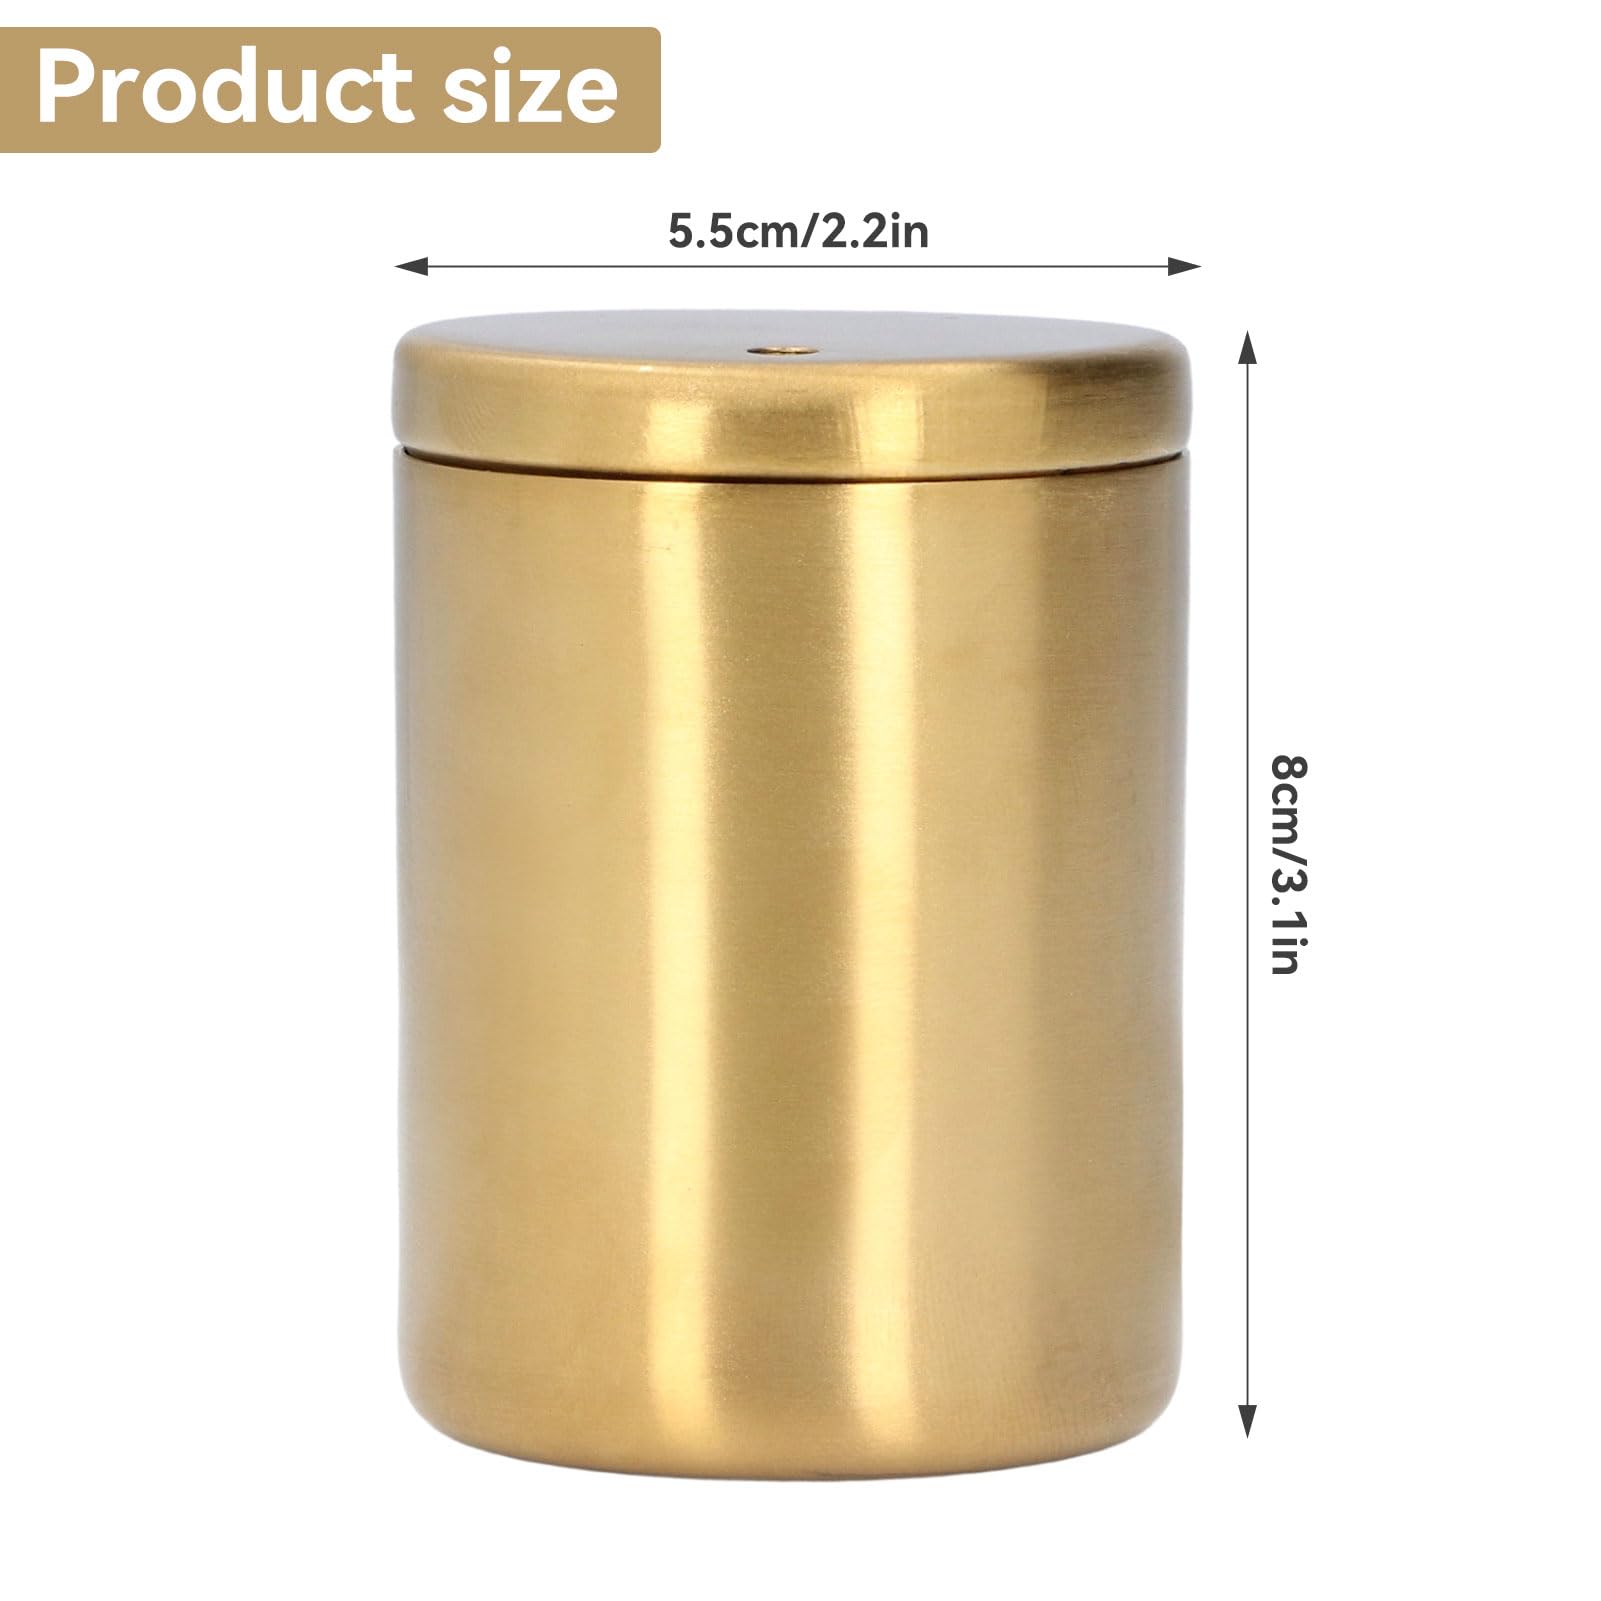 Toothpick Holder, 3.1x2.2in Stainless Steel Toothpick Holder Dispenser Pocket Toothpick Holder Metal Toothpick Storage Box for Table, Restaurant, Travel(Gold)